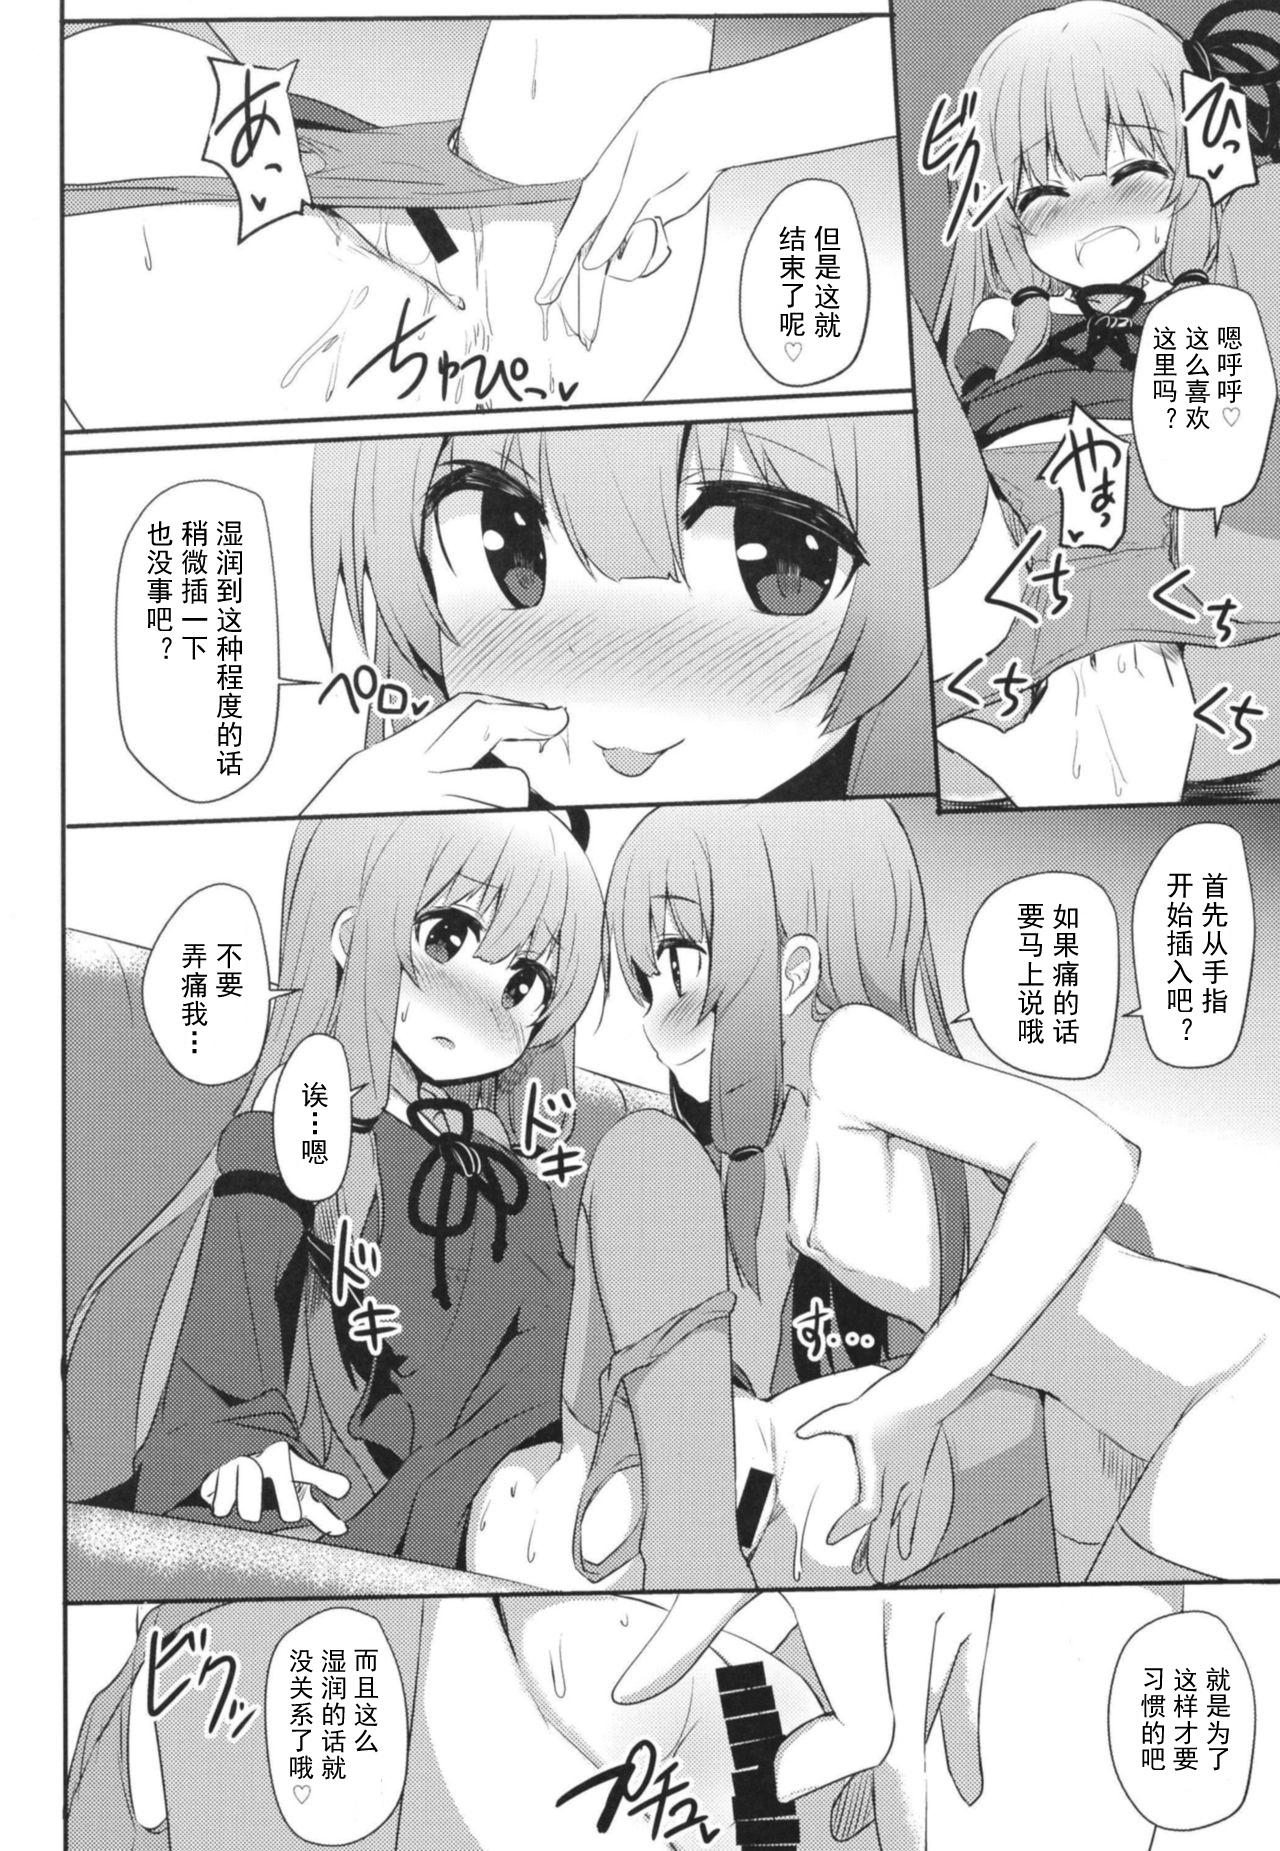 Anal [Milk Pudding (Jamcy)] Akane-chan Challenge! 4-kaime (VOICEROID) [Chinese] [古早个人汉化] [Digital] - Voiceroid Ethnic - Page 6